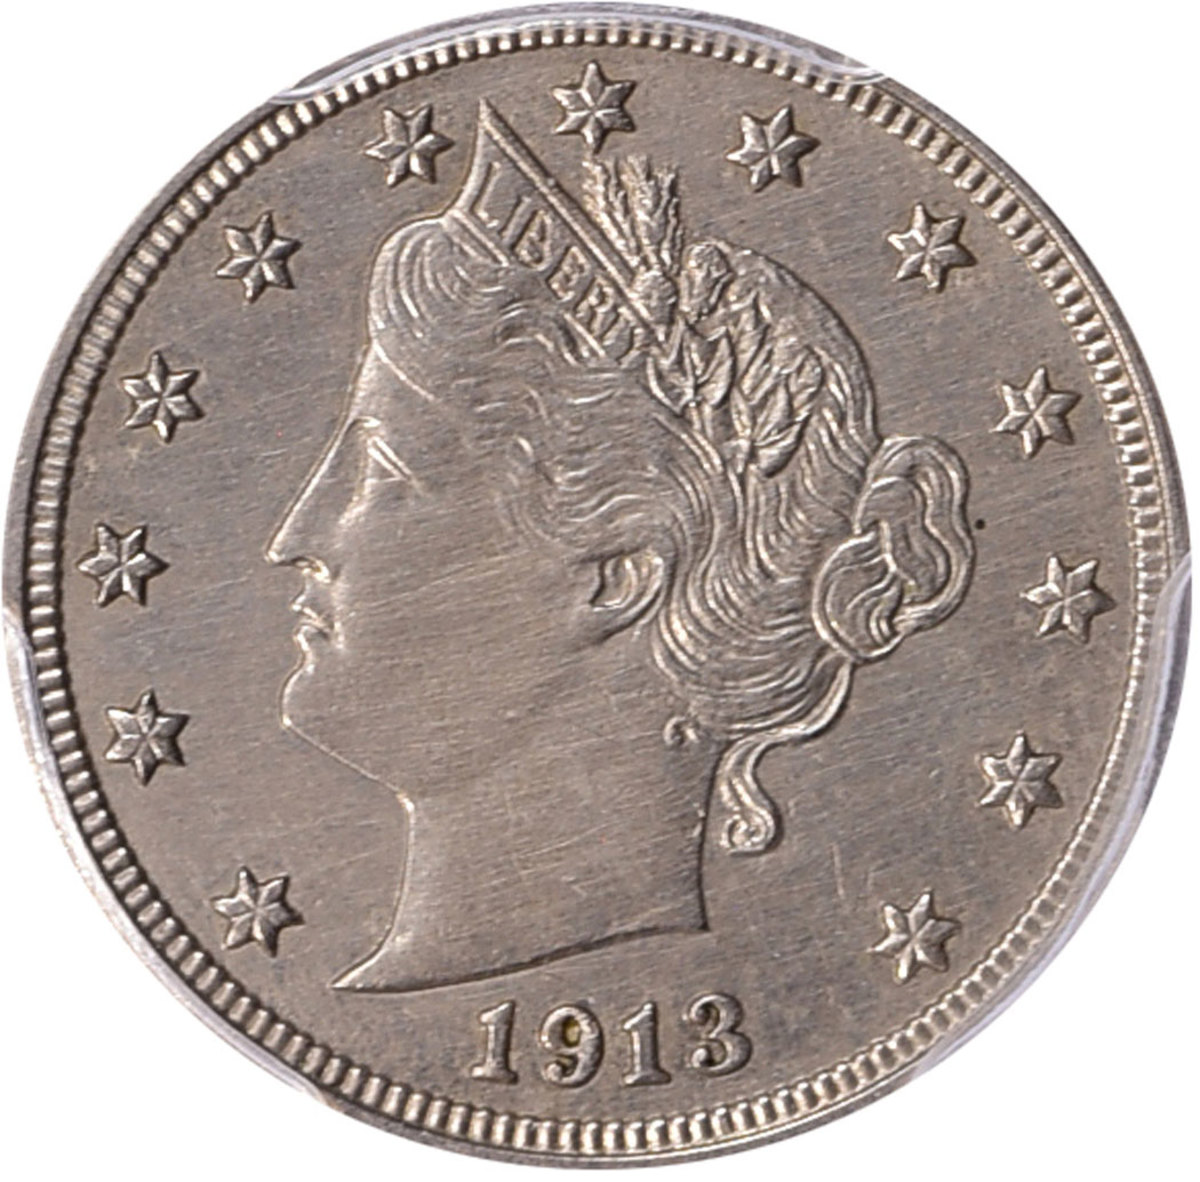 Obverse of the Walton 1913 Liberty Head nickel. (Image courtesy GreatCollections.)